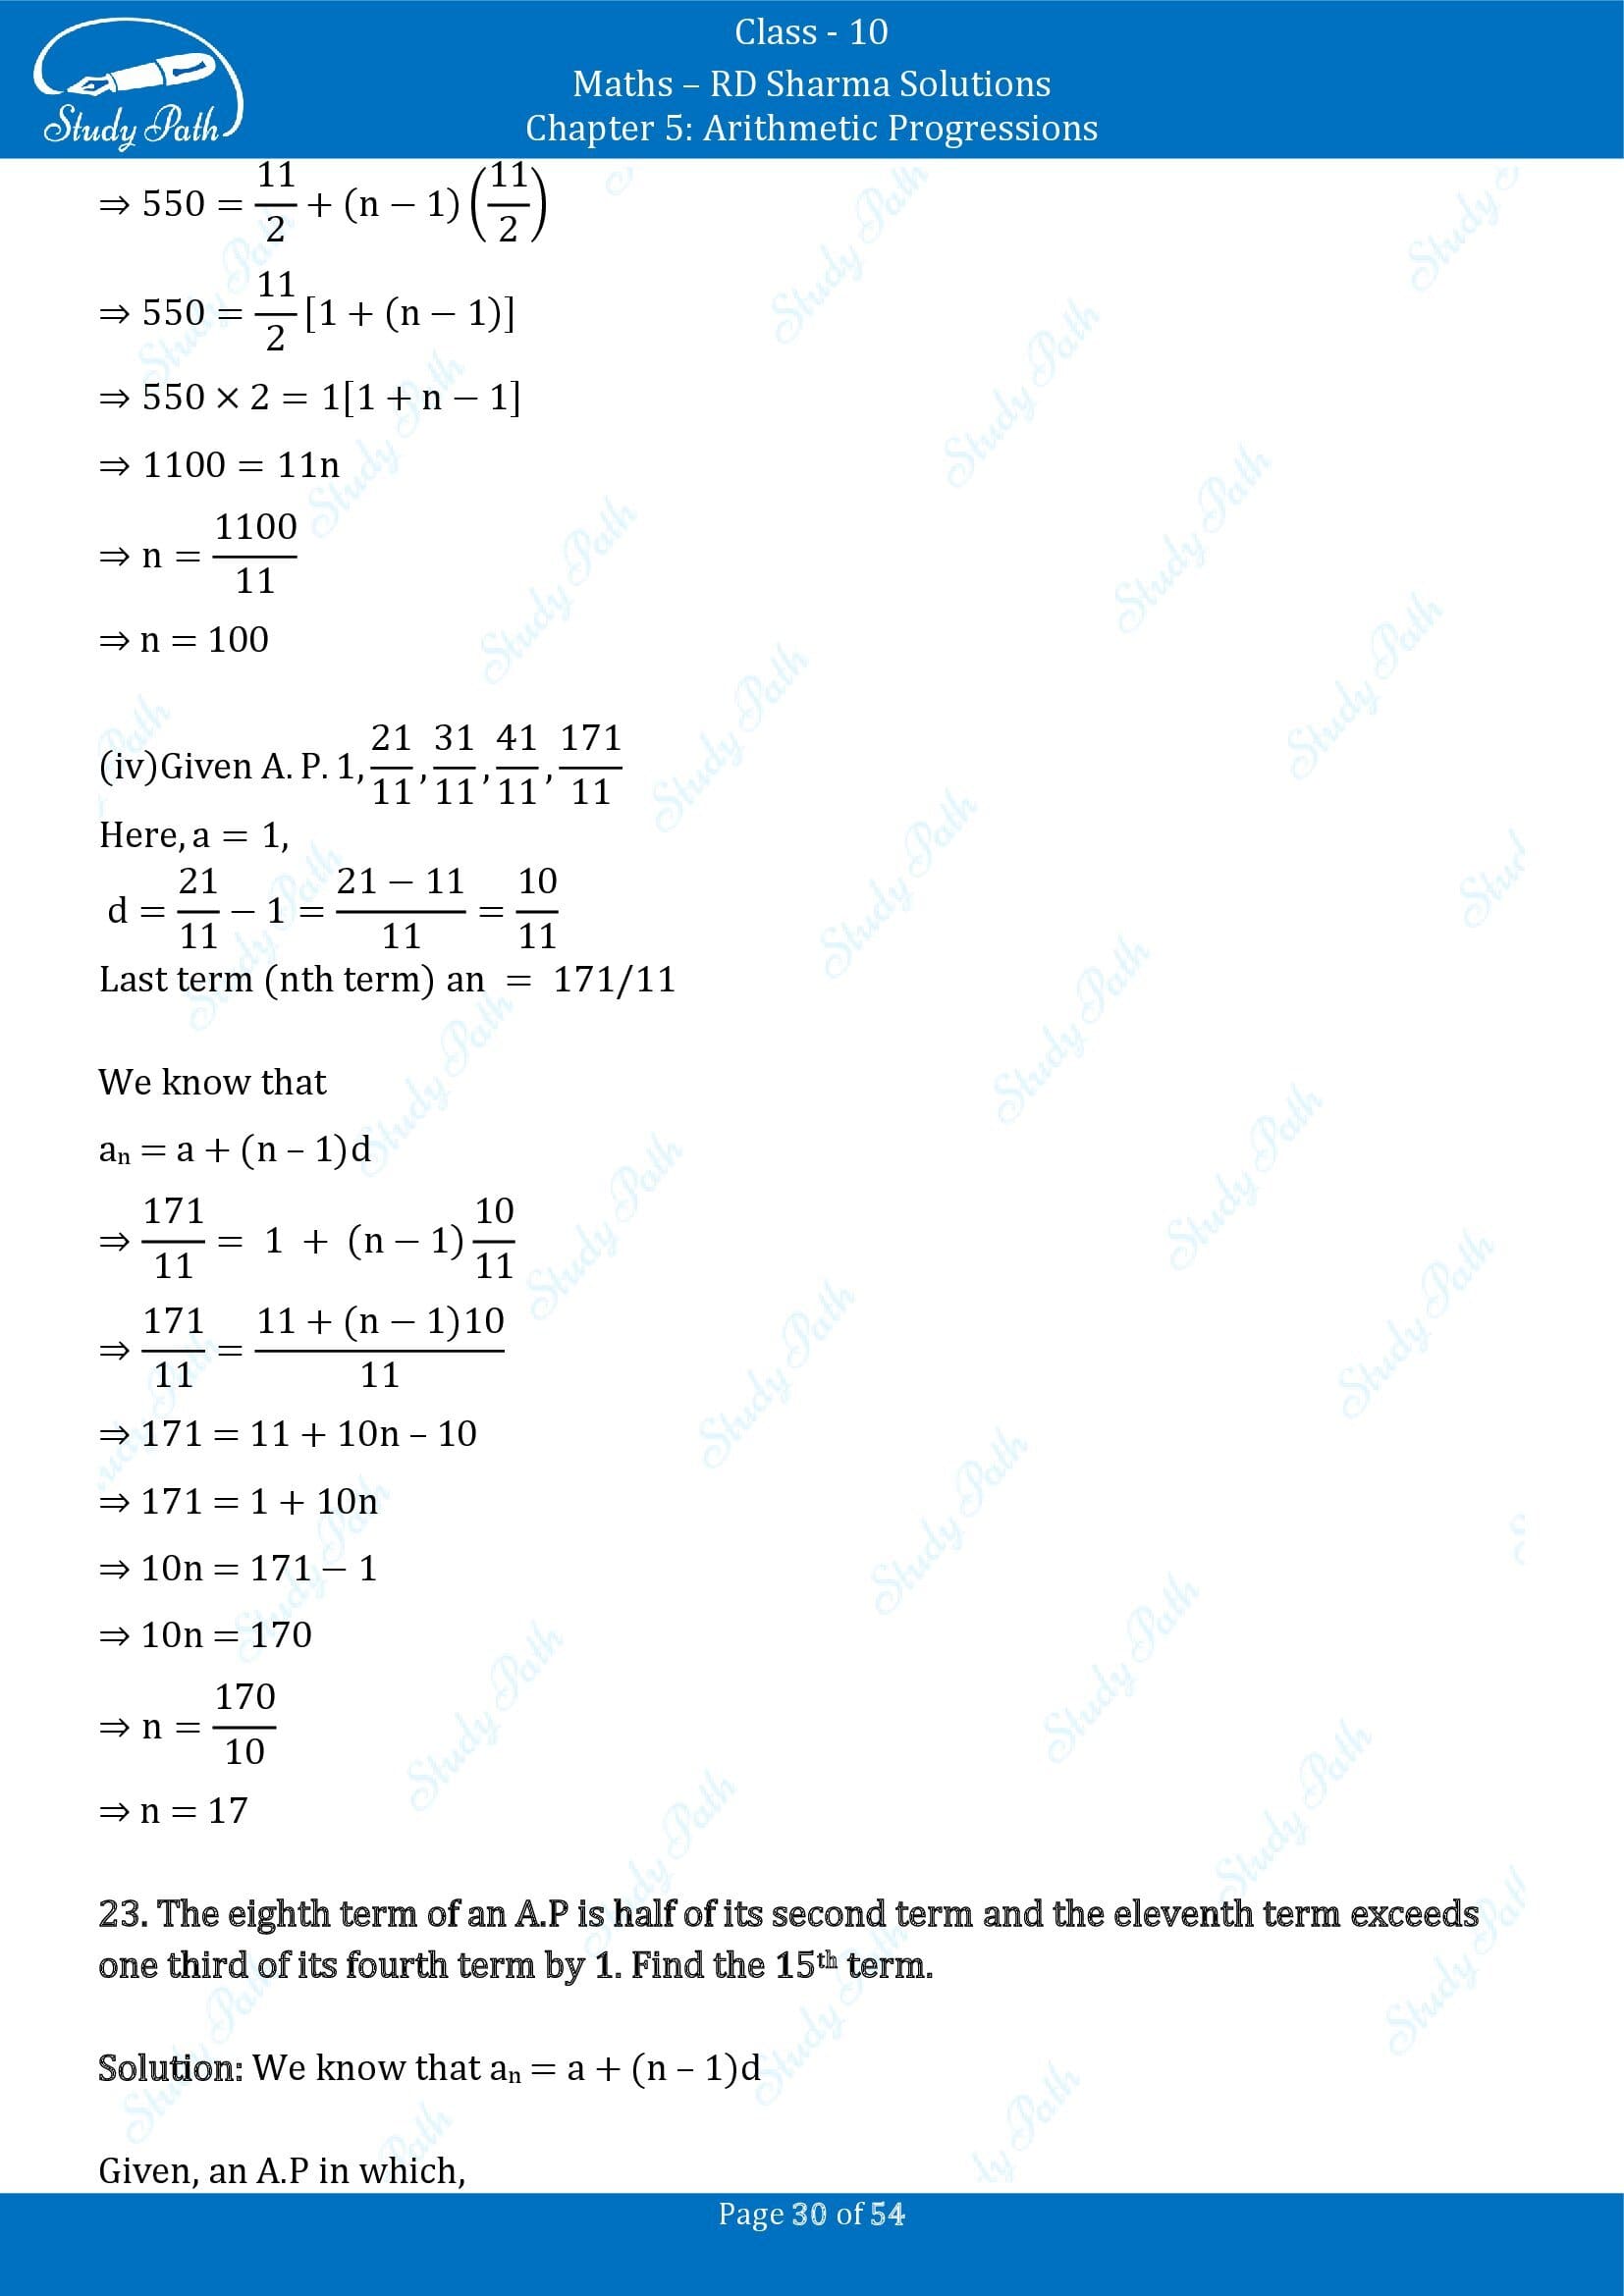 RD Sharma Solutions Class 10 Chapter 5 Arithmetic Progressions Exercise 5.4 00030